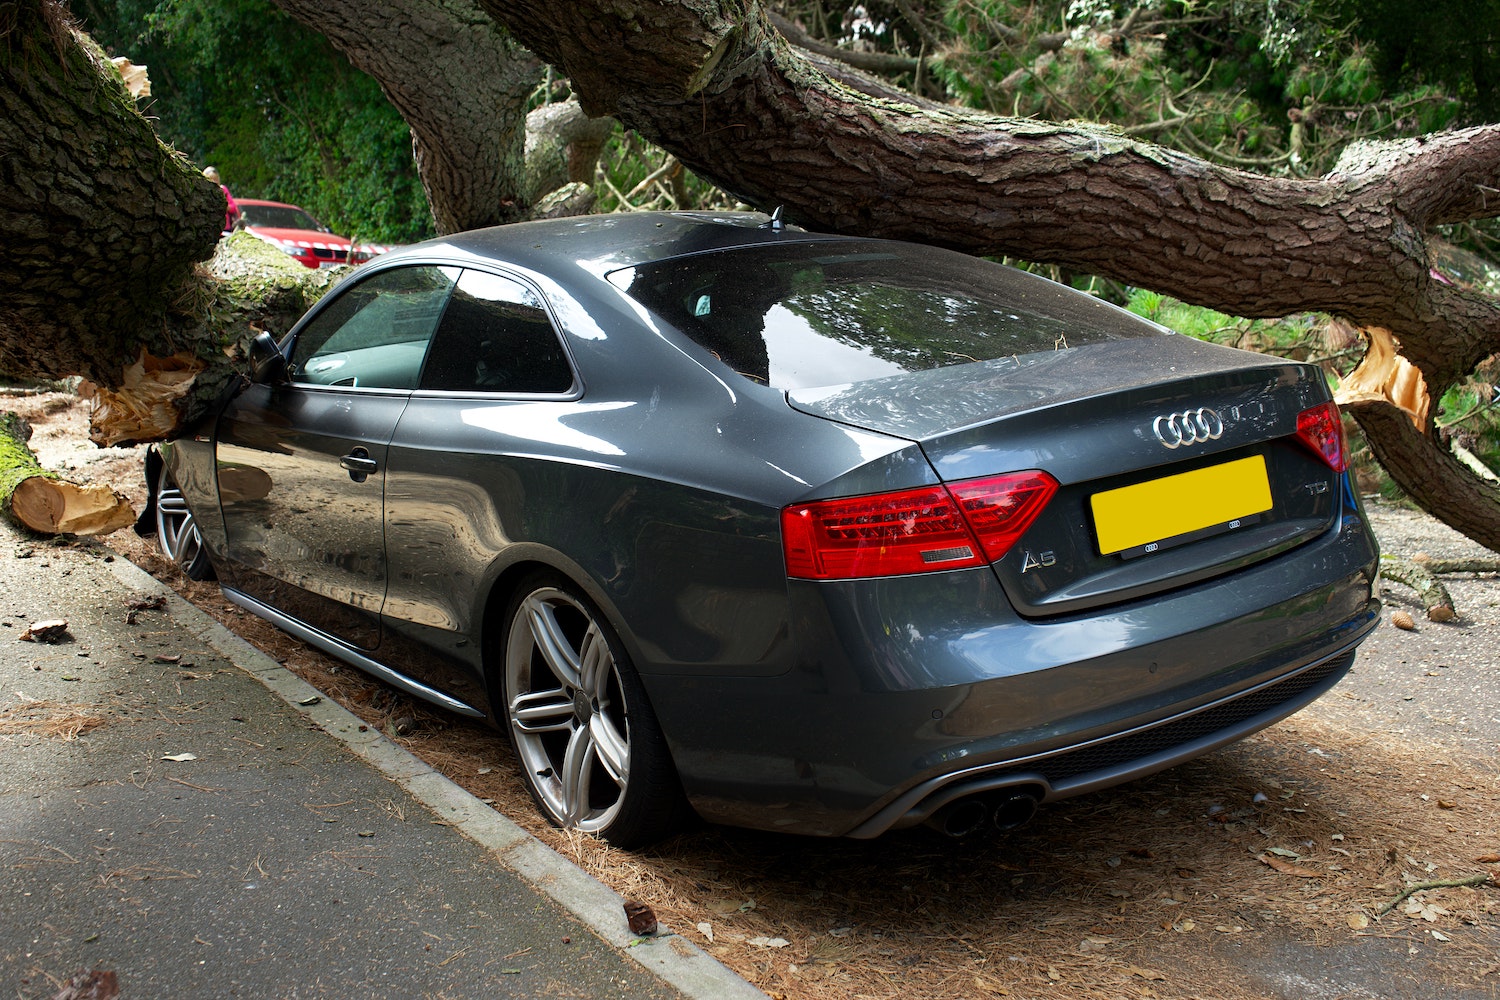 Audi A5 Crushed By Tree from rear end angle with tree on roof and crushed front end on road.